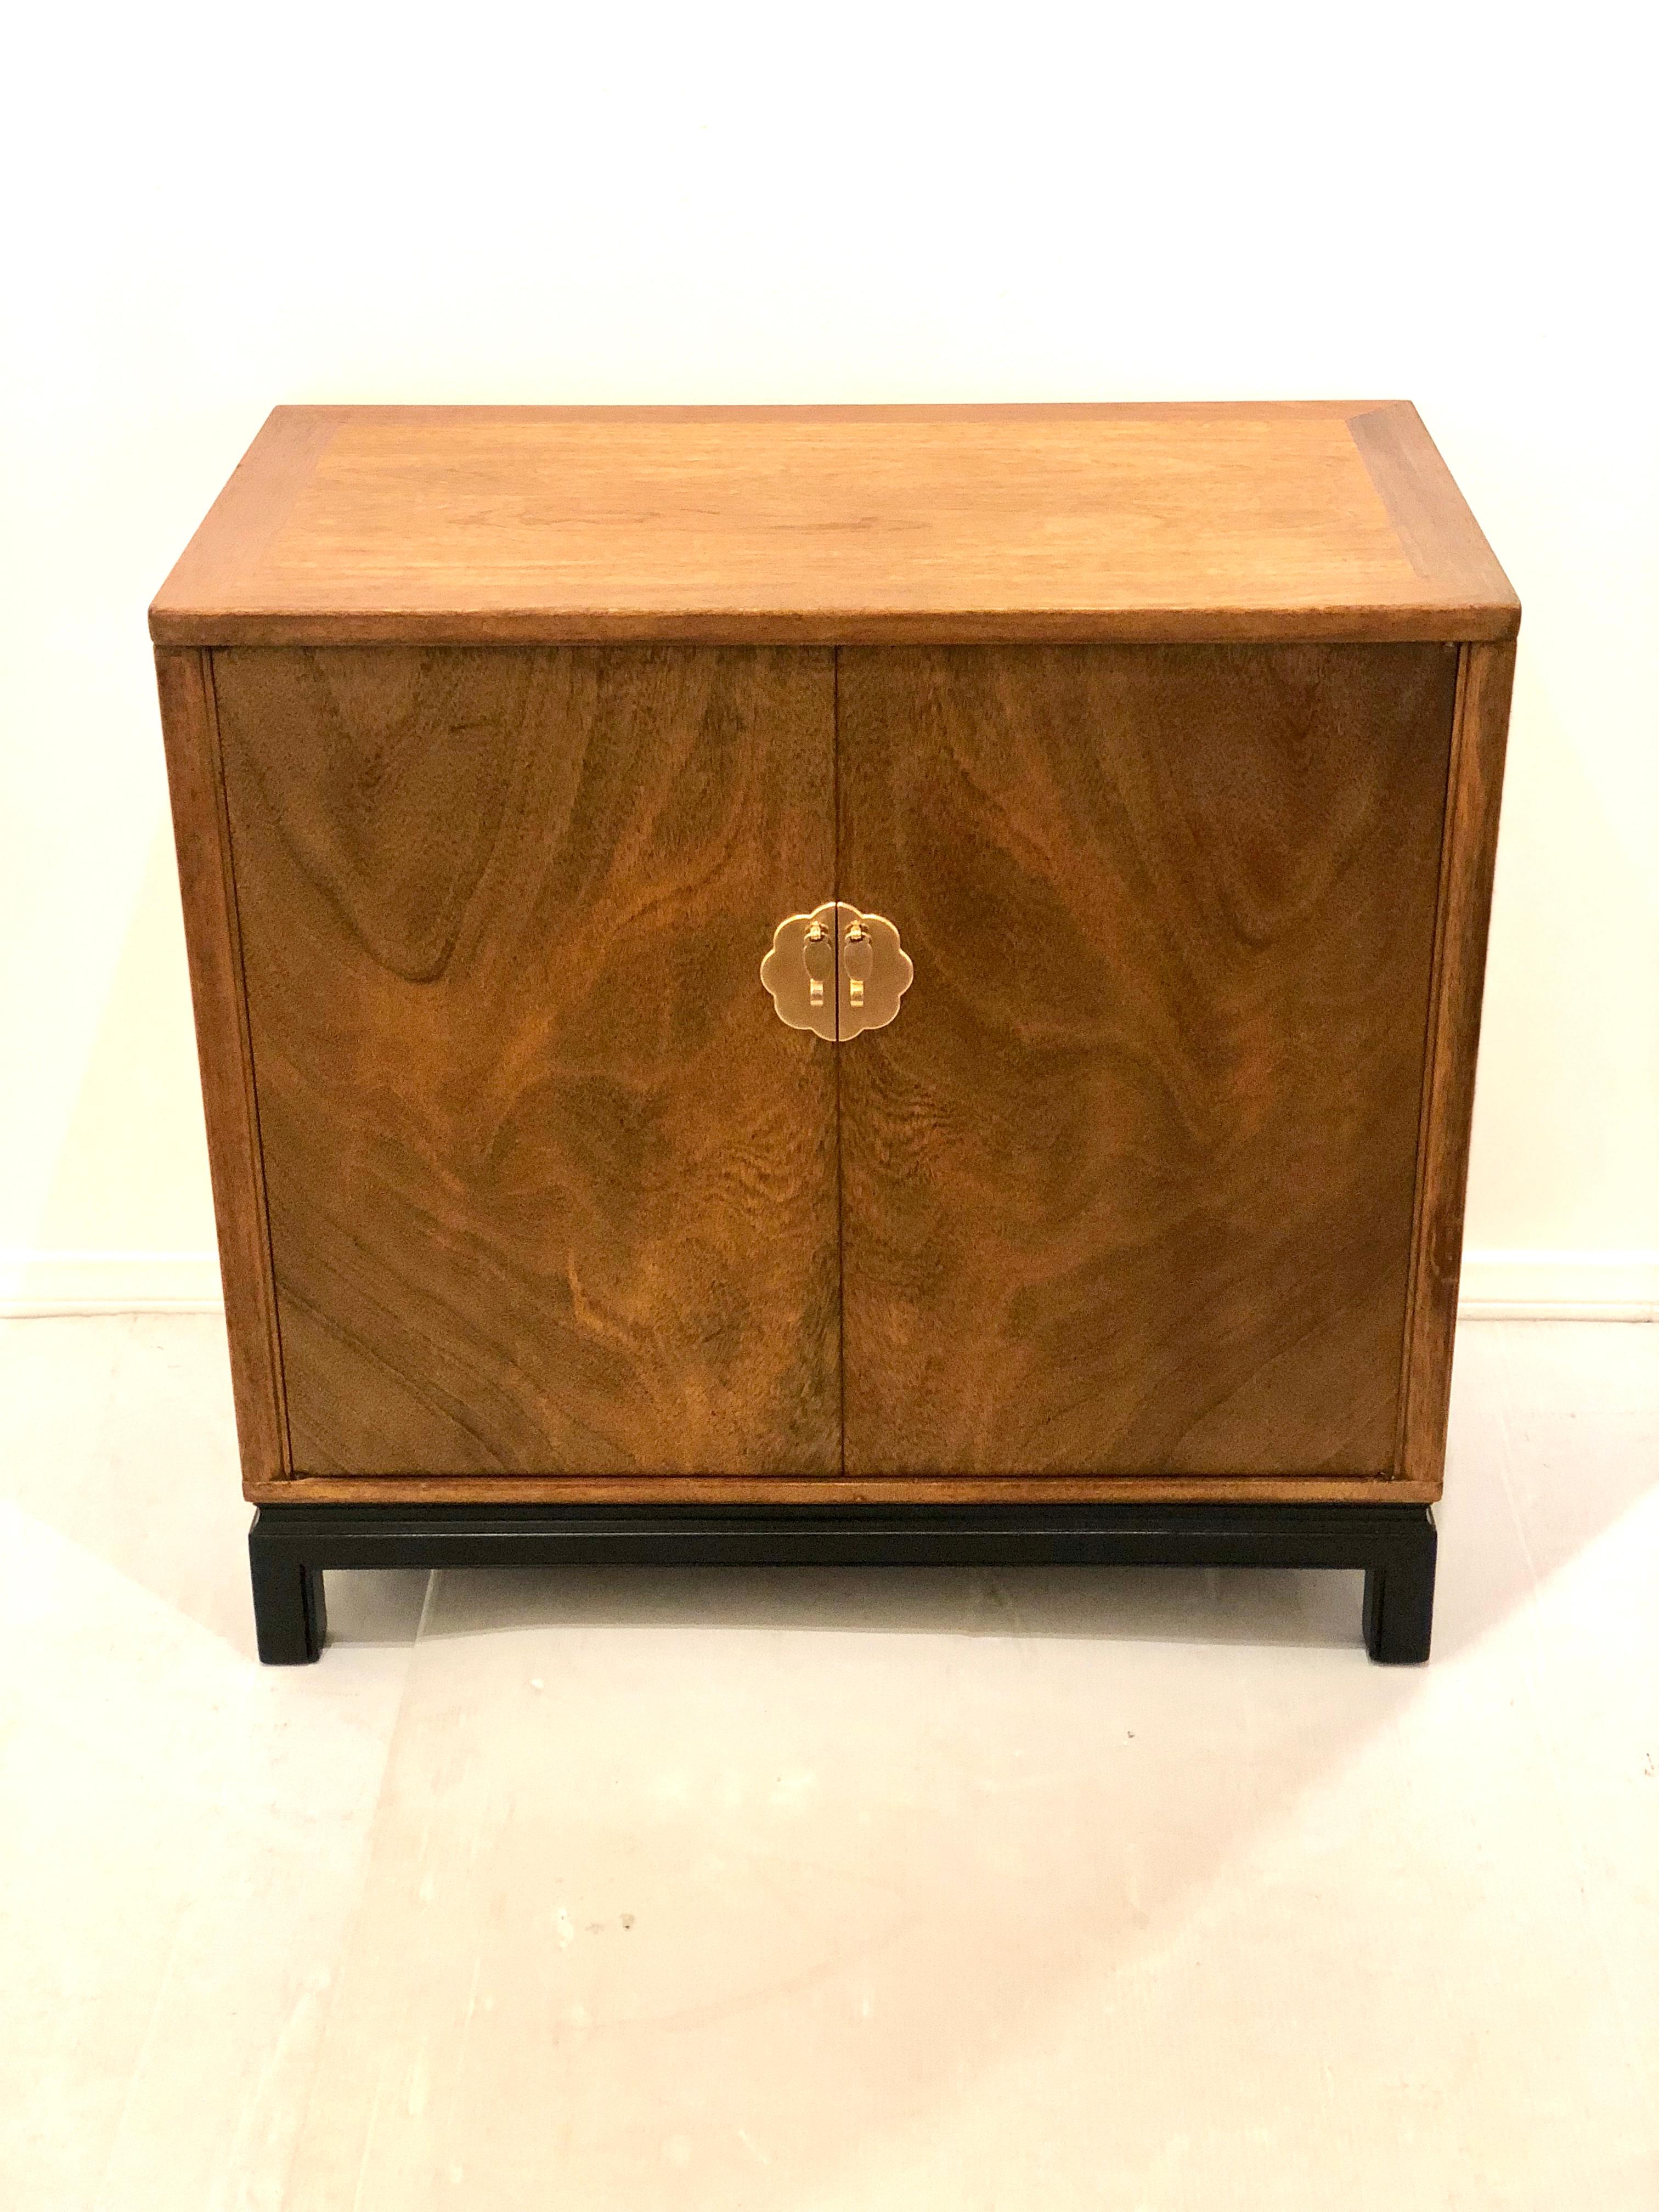 Beautiful and versatile double door cabinet by Lanstrom furniture, great quality double drawers freshly refinished in mahogany with black lacquer base, and polished brass handles, circa 1950s goes well with midcentury or Hollywood Regency.